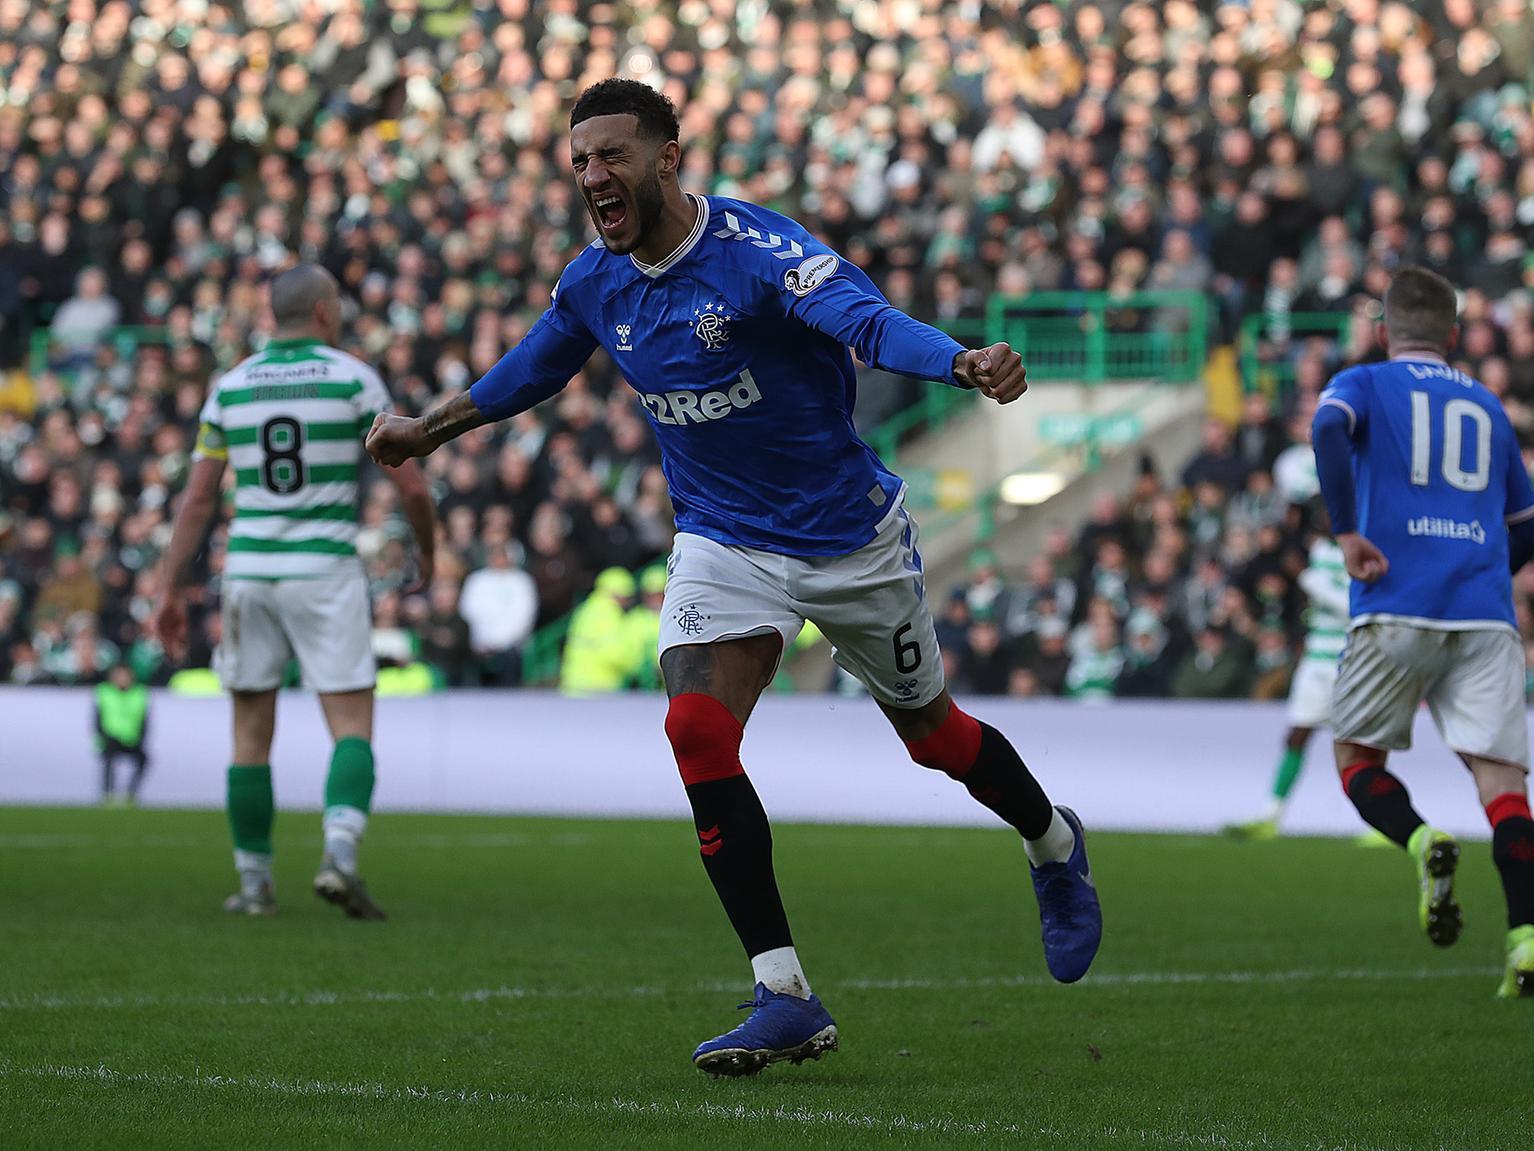 Fulham have been linked with a move for Rangers defender Connor Goldson, as they look to shore up their back line ahead of a push for the promotion play-off places. (Football Insider)